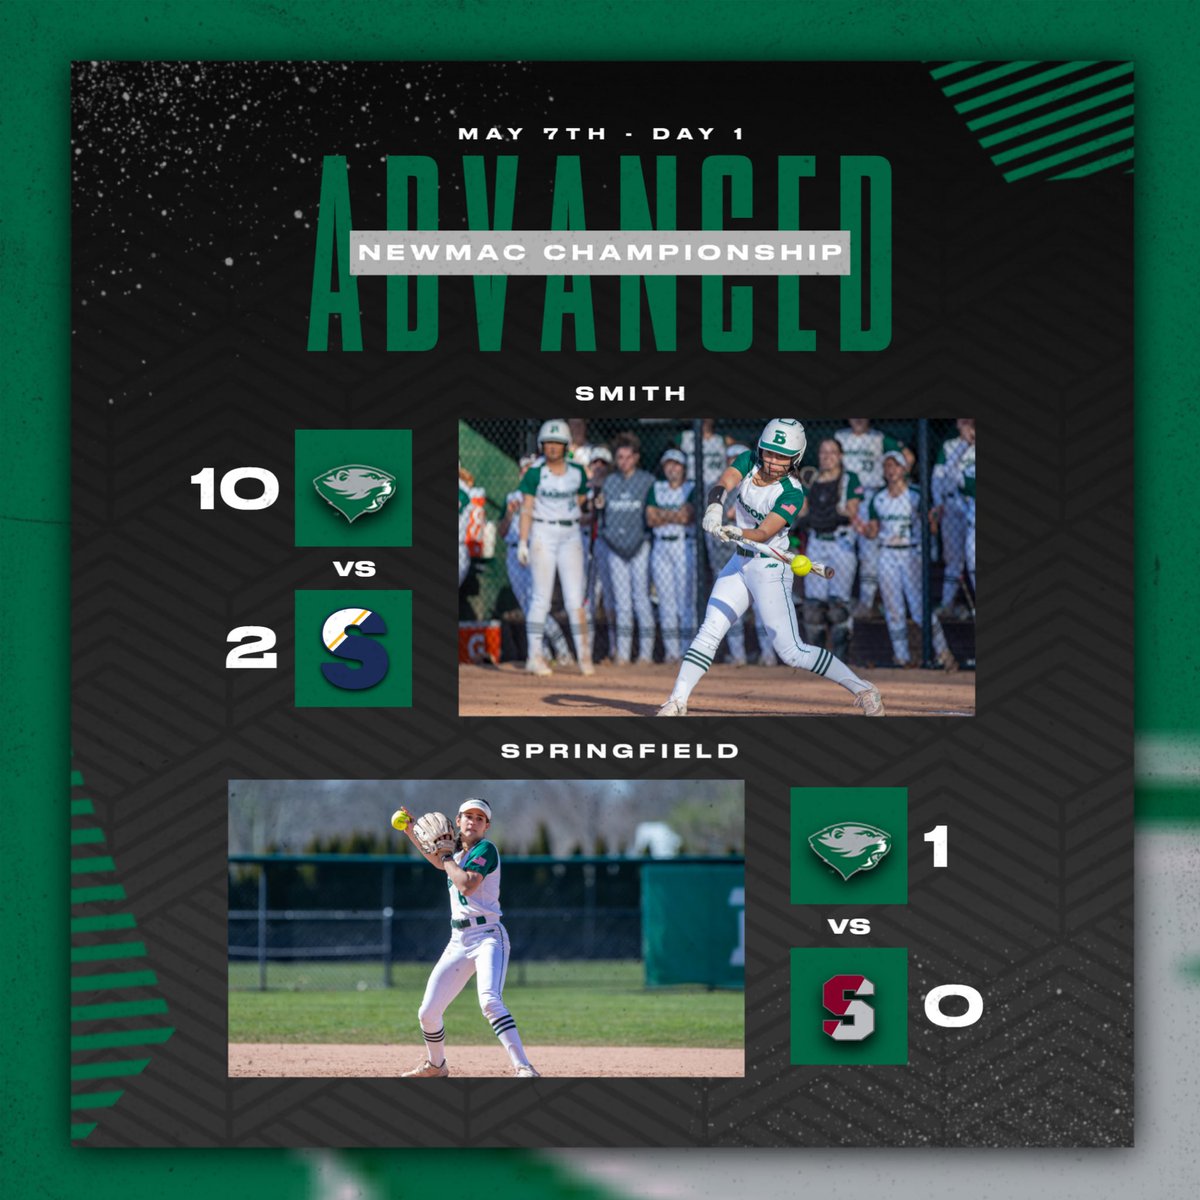 Beavers have advanced in the winners bracket👑👑

Babo SWEEPS another day winning 10-2 over Smith in 5 & edging Springfield 1-0 with a clutch RBI from Sophia Pak. The tournament continues Friday, May 10th! 🦫🥎

 #GoBabo #StrictlyBusiness #EveryDamDay #NEWMACChampionships